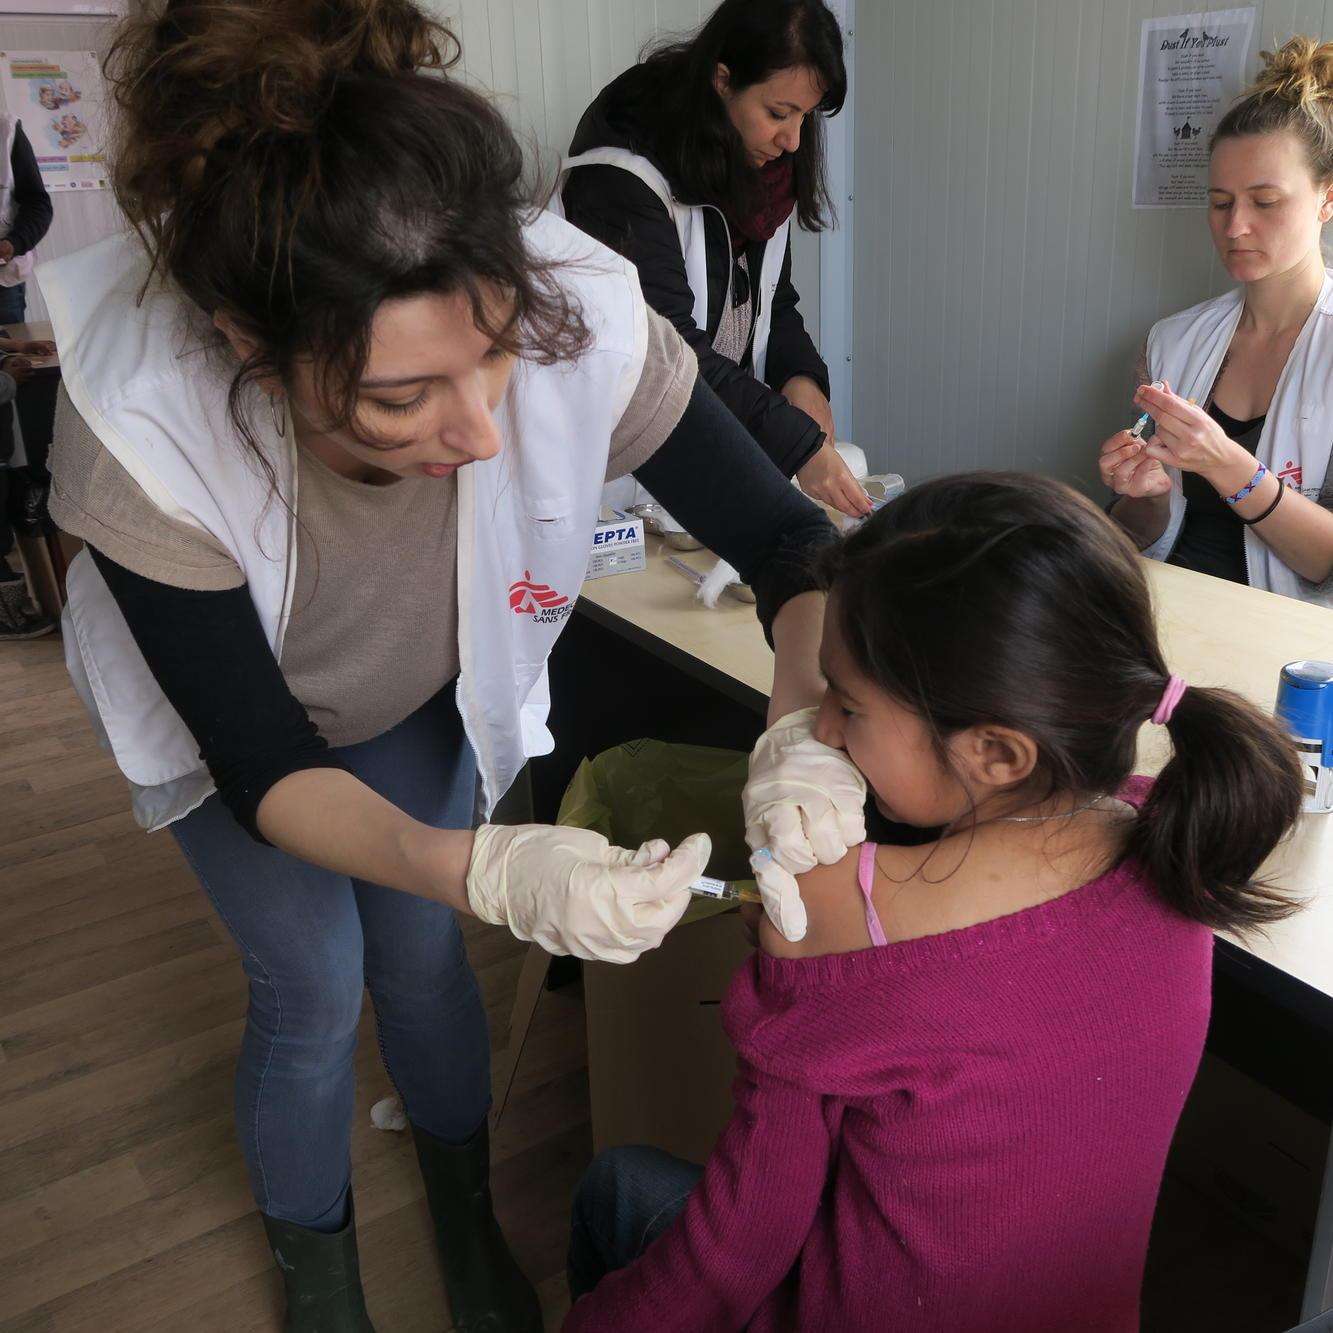 MSF nurse Persa Dimitsaki vaccinates a child during an emergency measles vaccination campaign in Moria camp on the Greek island of Lesvos